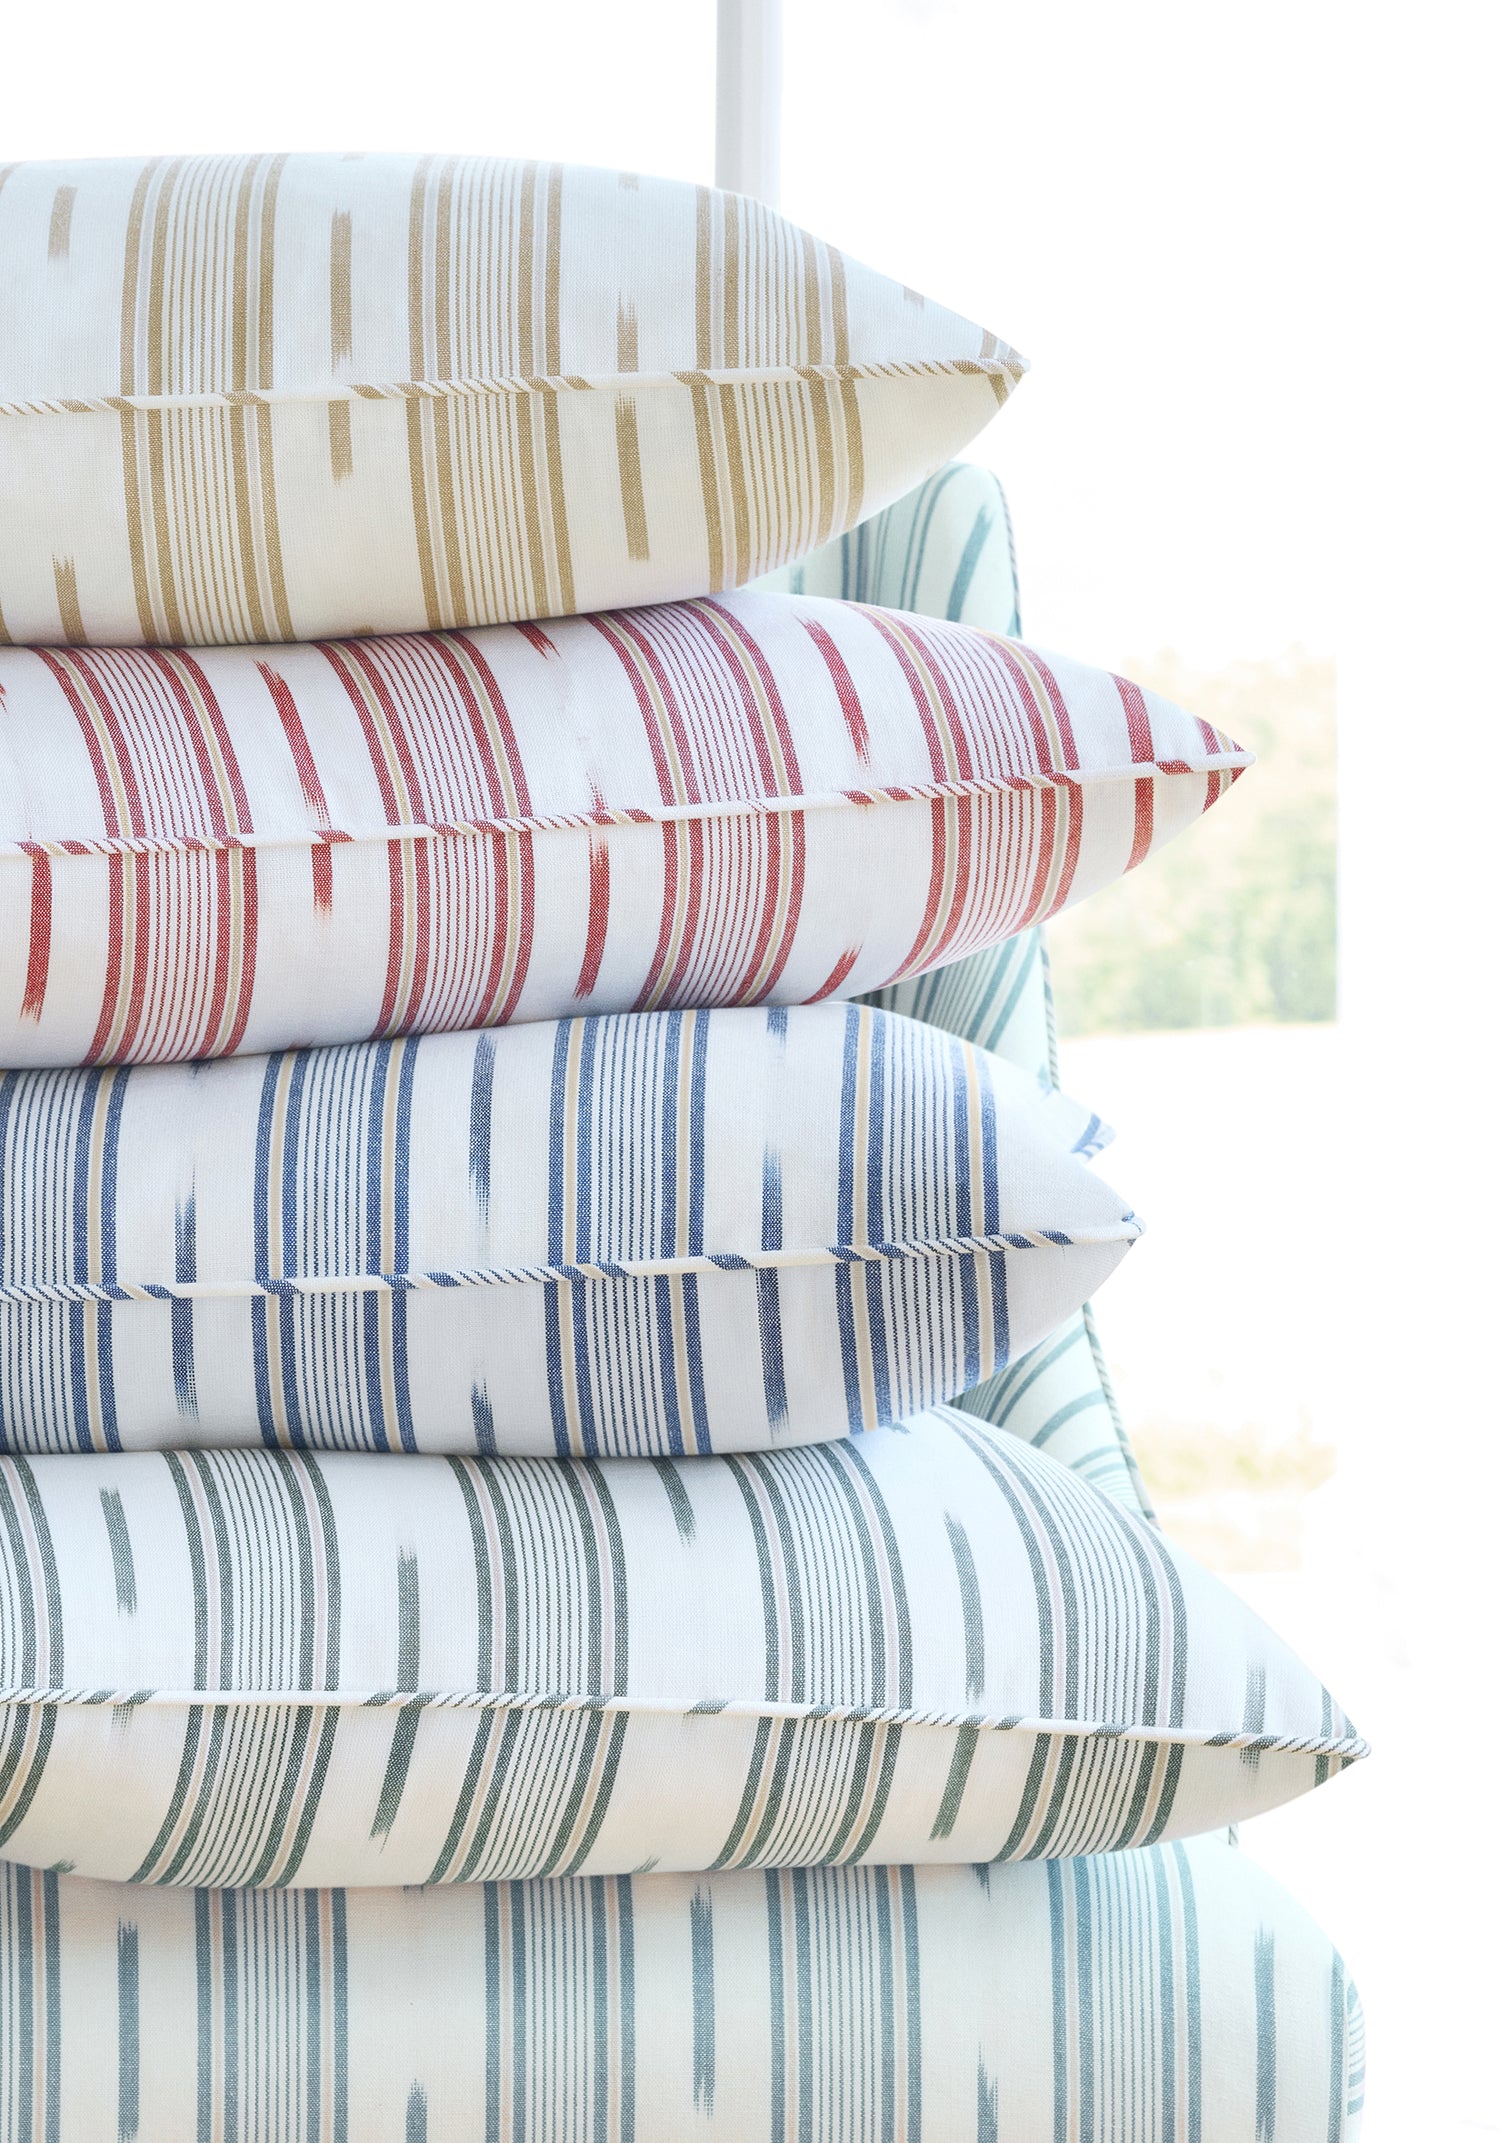 Pillows in Odeshia Stripe fabric in seaglass color - pattern number W781305 - by Thibaut in the Montecito collection